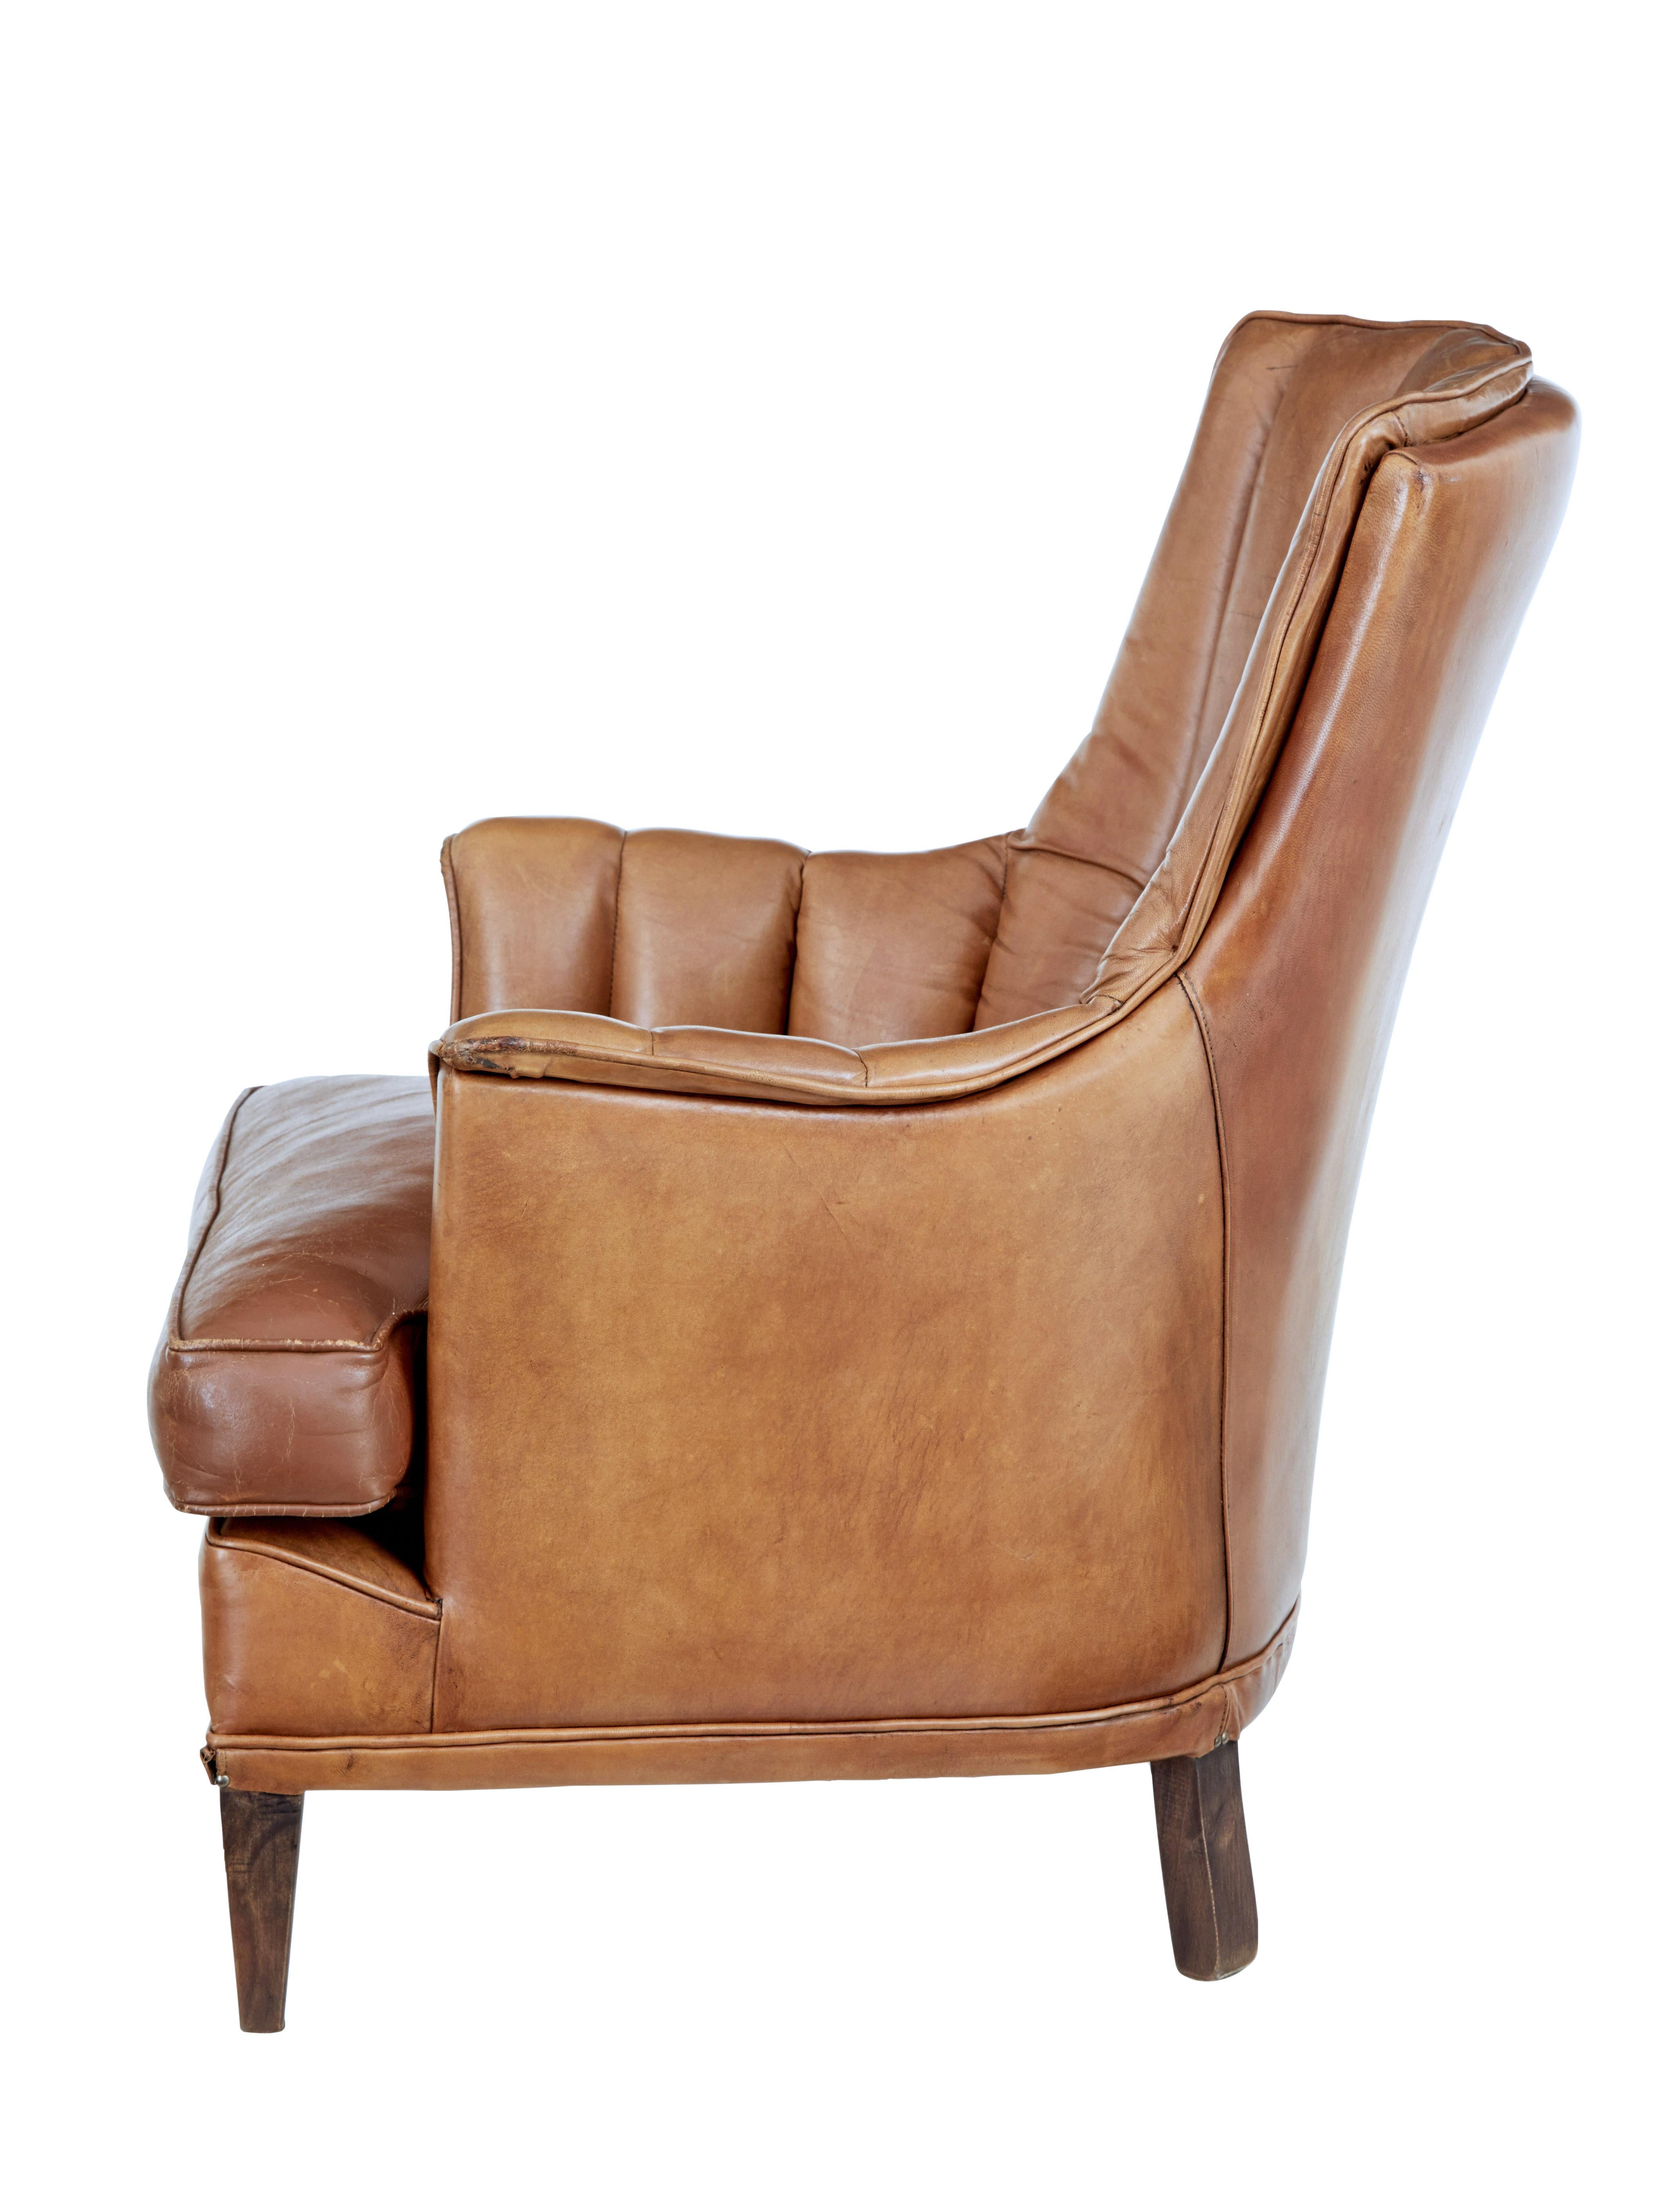 Hand-Crafted Mid 20th century leather shell back lounge chair